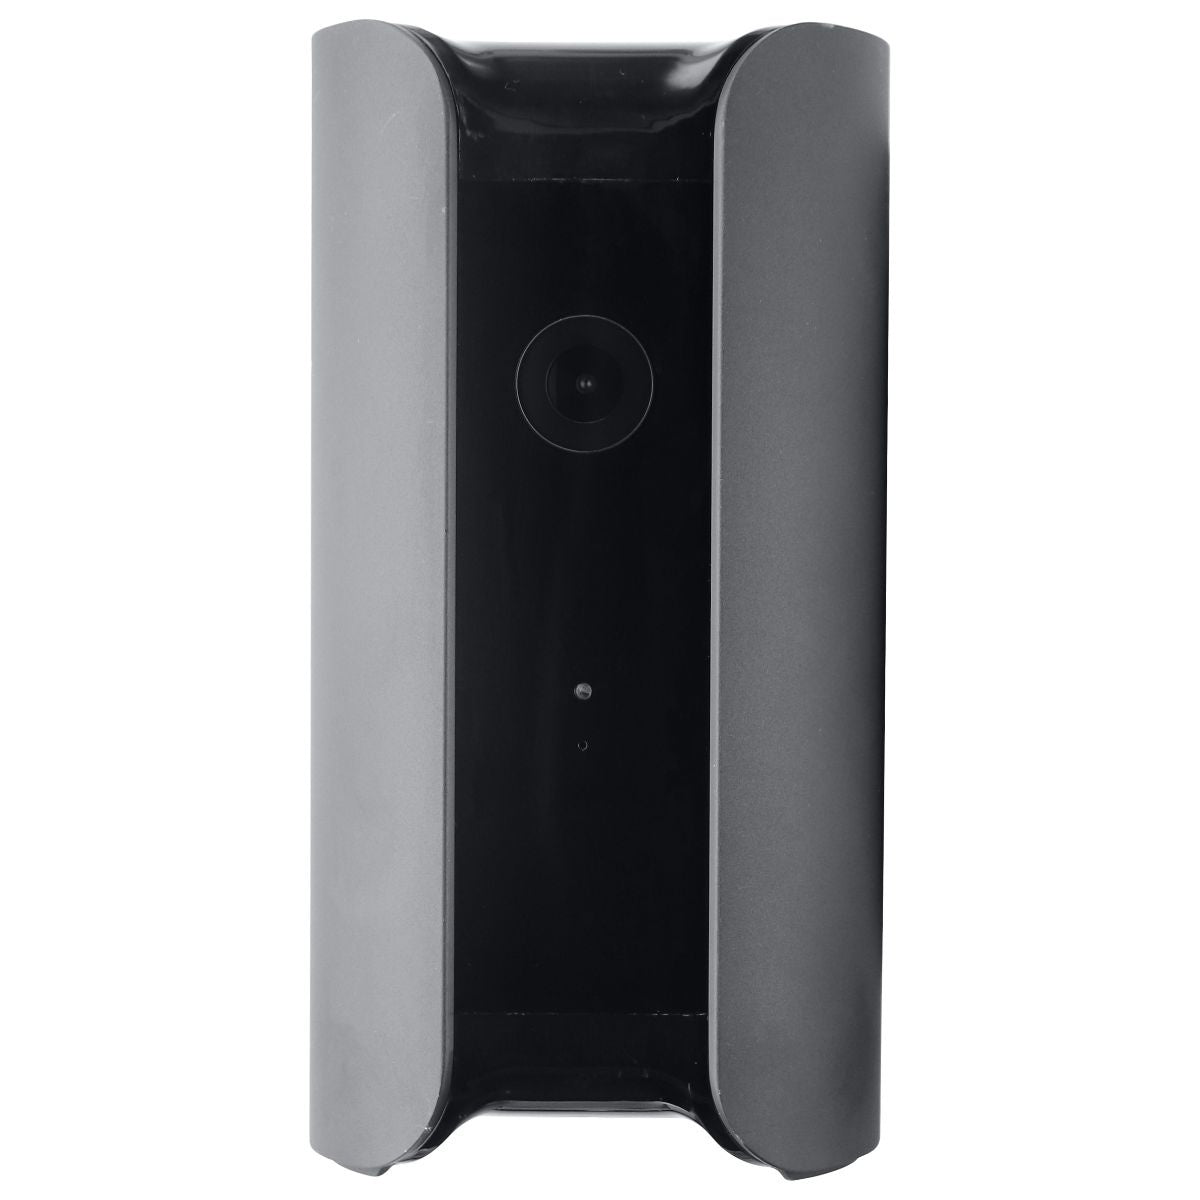 Canary View Wireless Indoor Home Security Camera - Black (CAN400USBK) Home Surveillance - Security Cameras Canary    - Simple Cell Bulk Wholesale Pricing - USA Seller